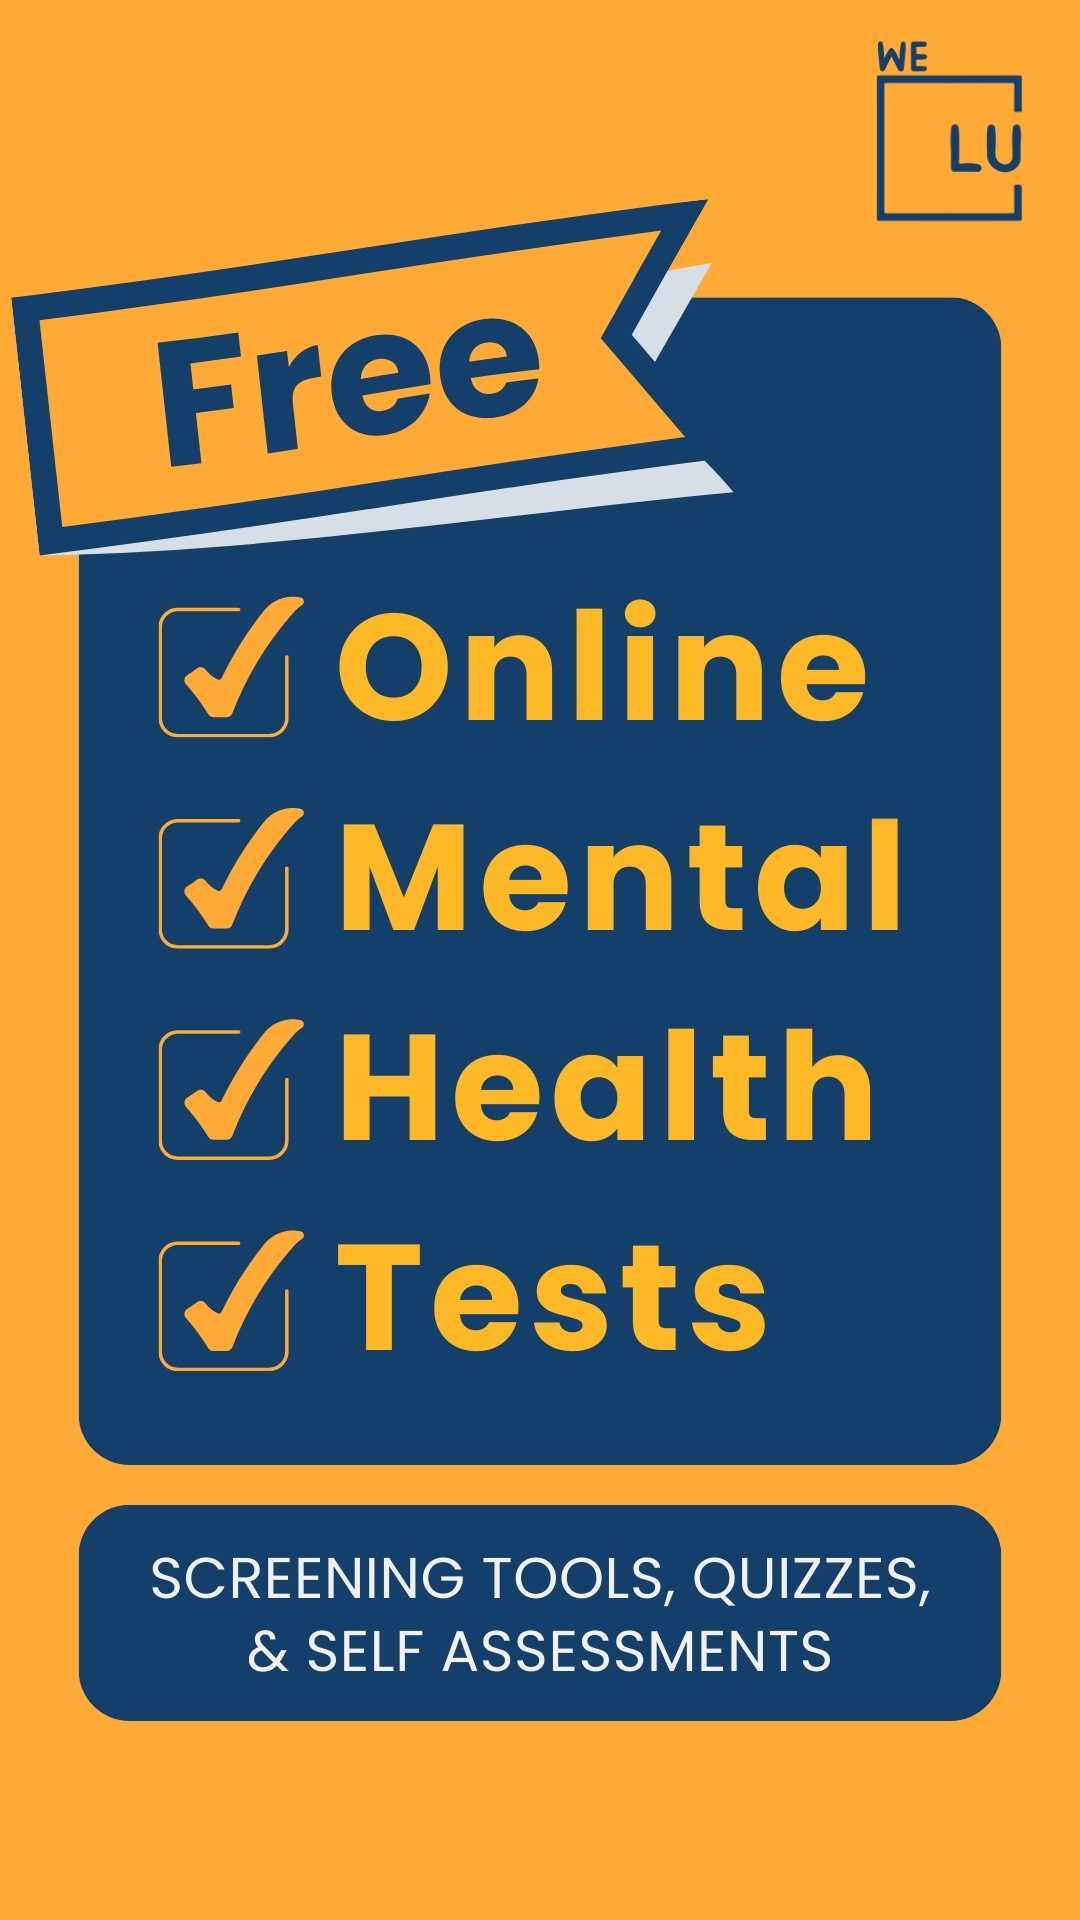 Free Online Mental Health Tests, Screening Tools, Quizzes, & Self Assessments